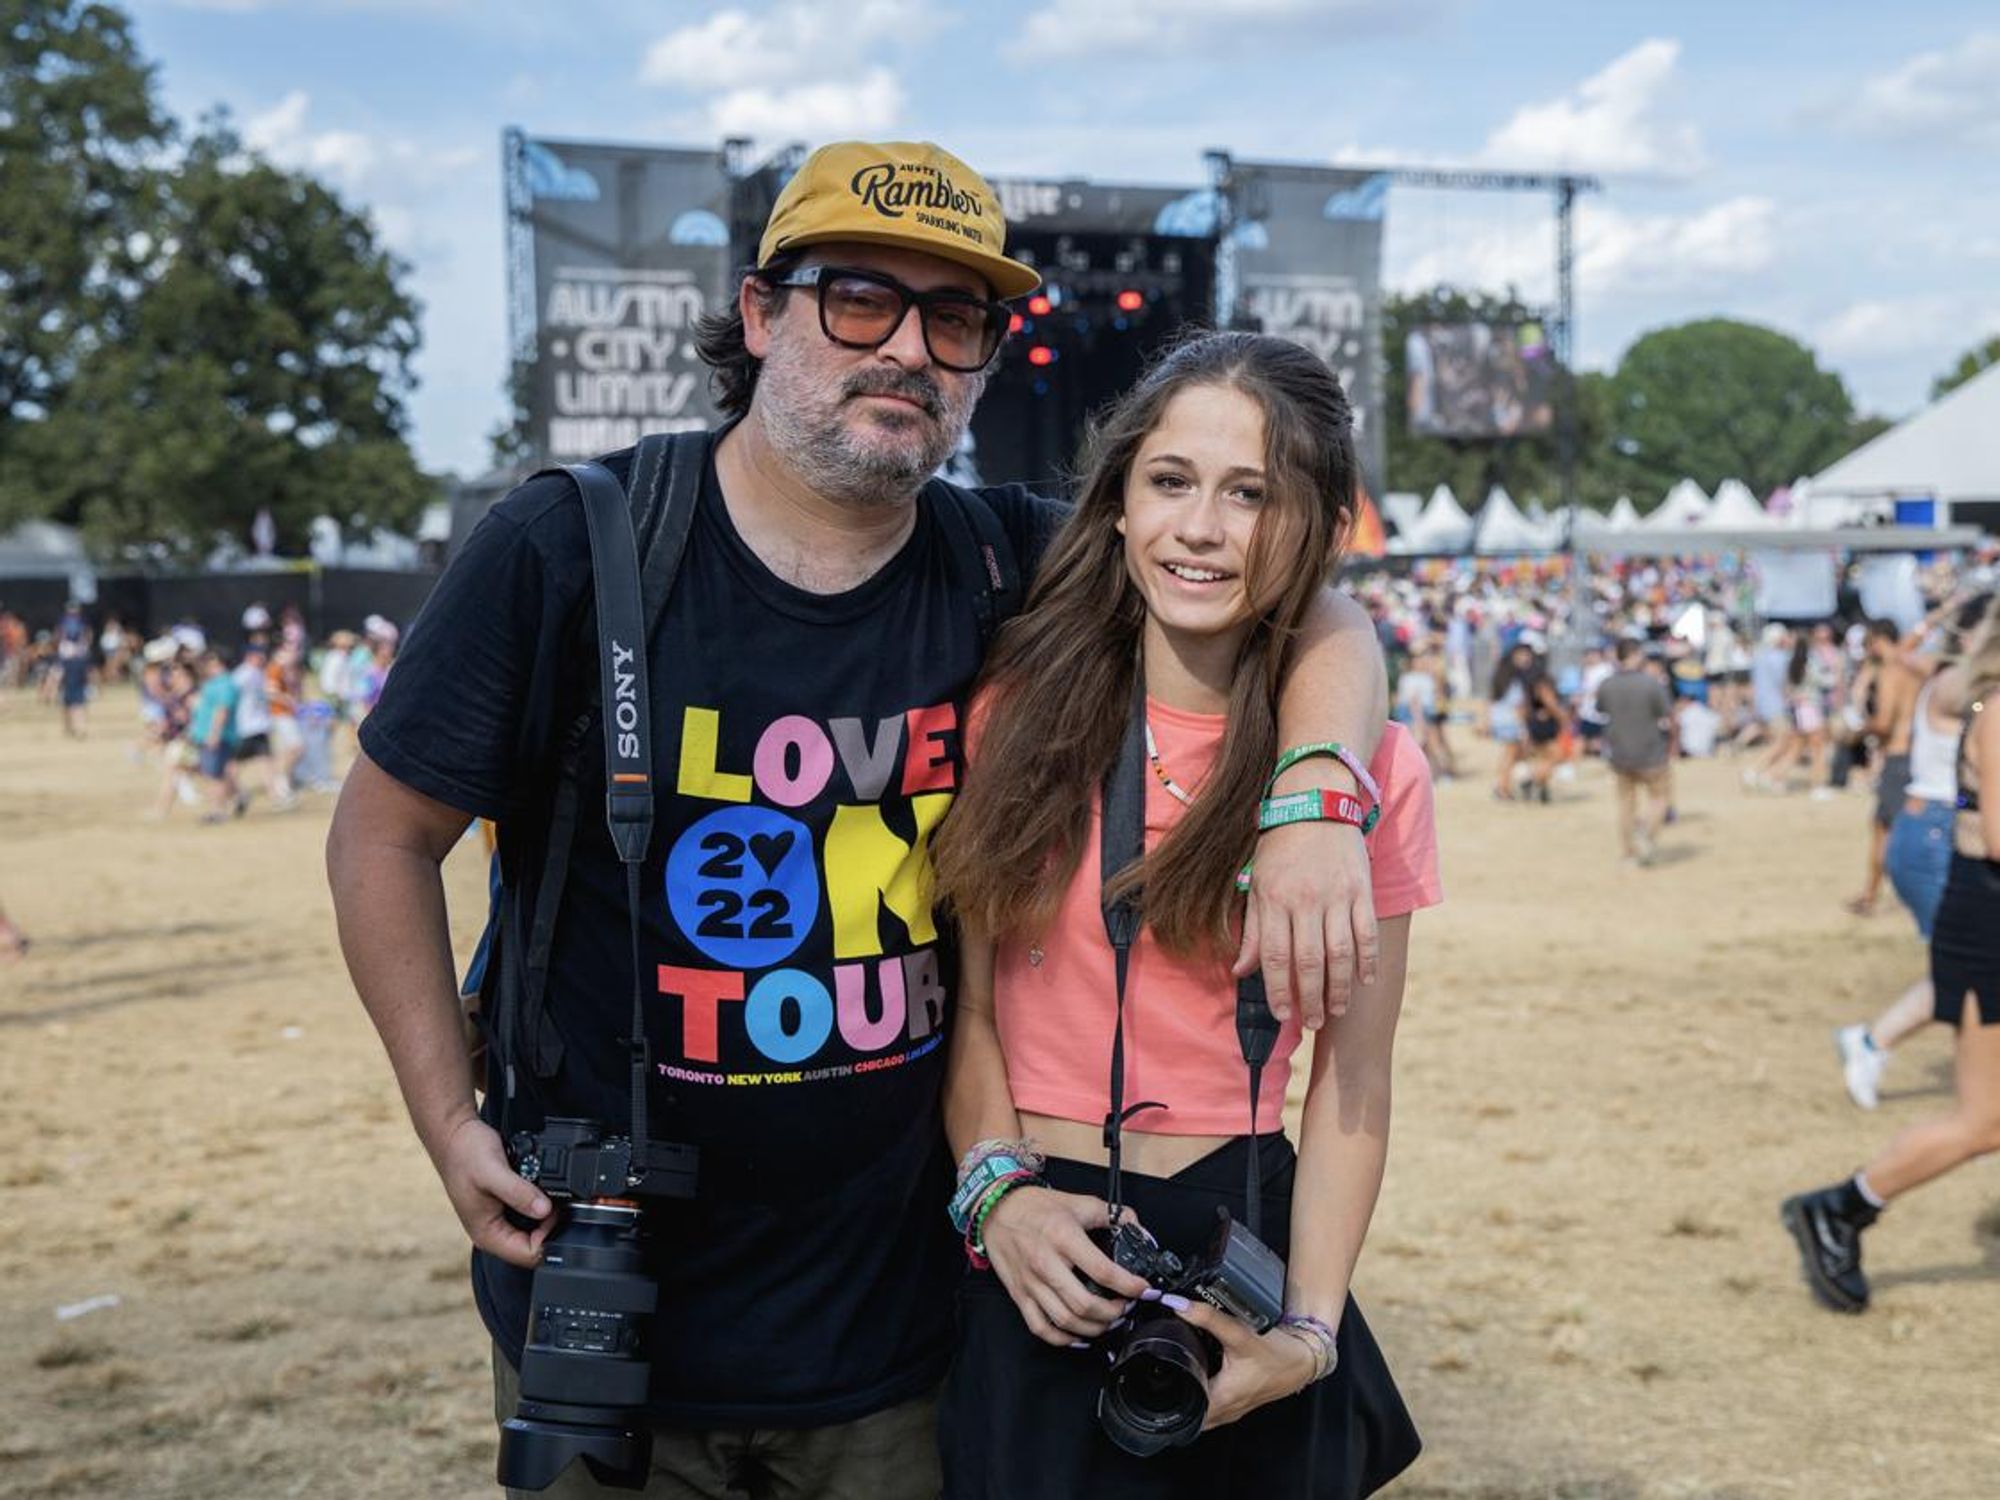 Austin father-daughter photography duo captures essence of ACL Fest through her lens